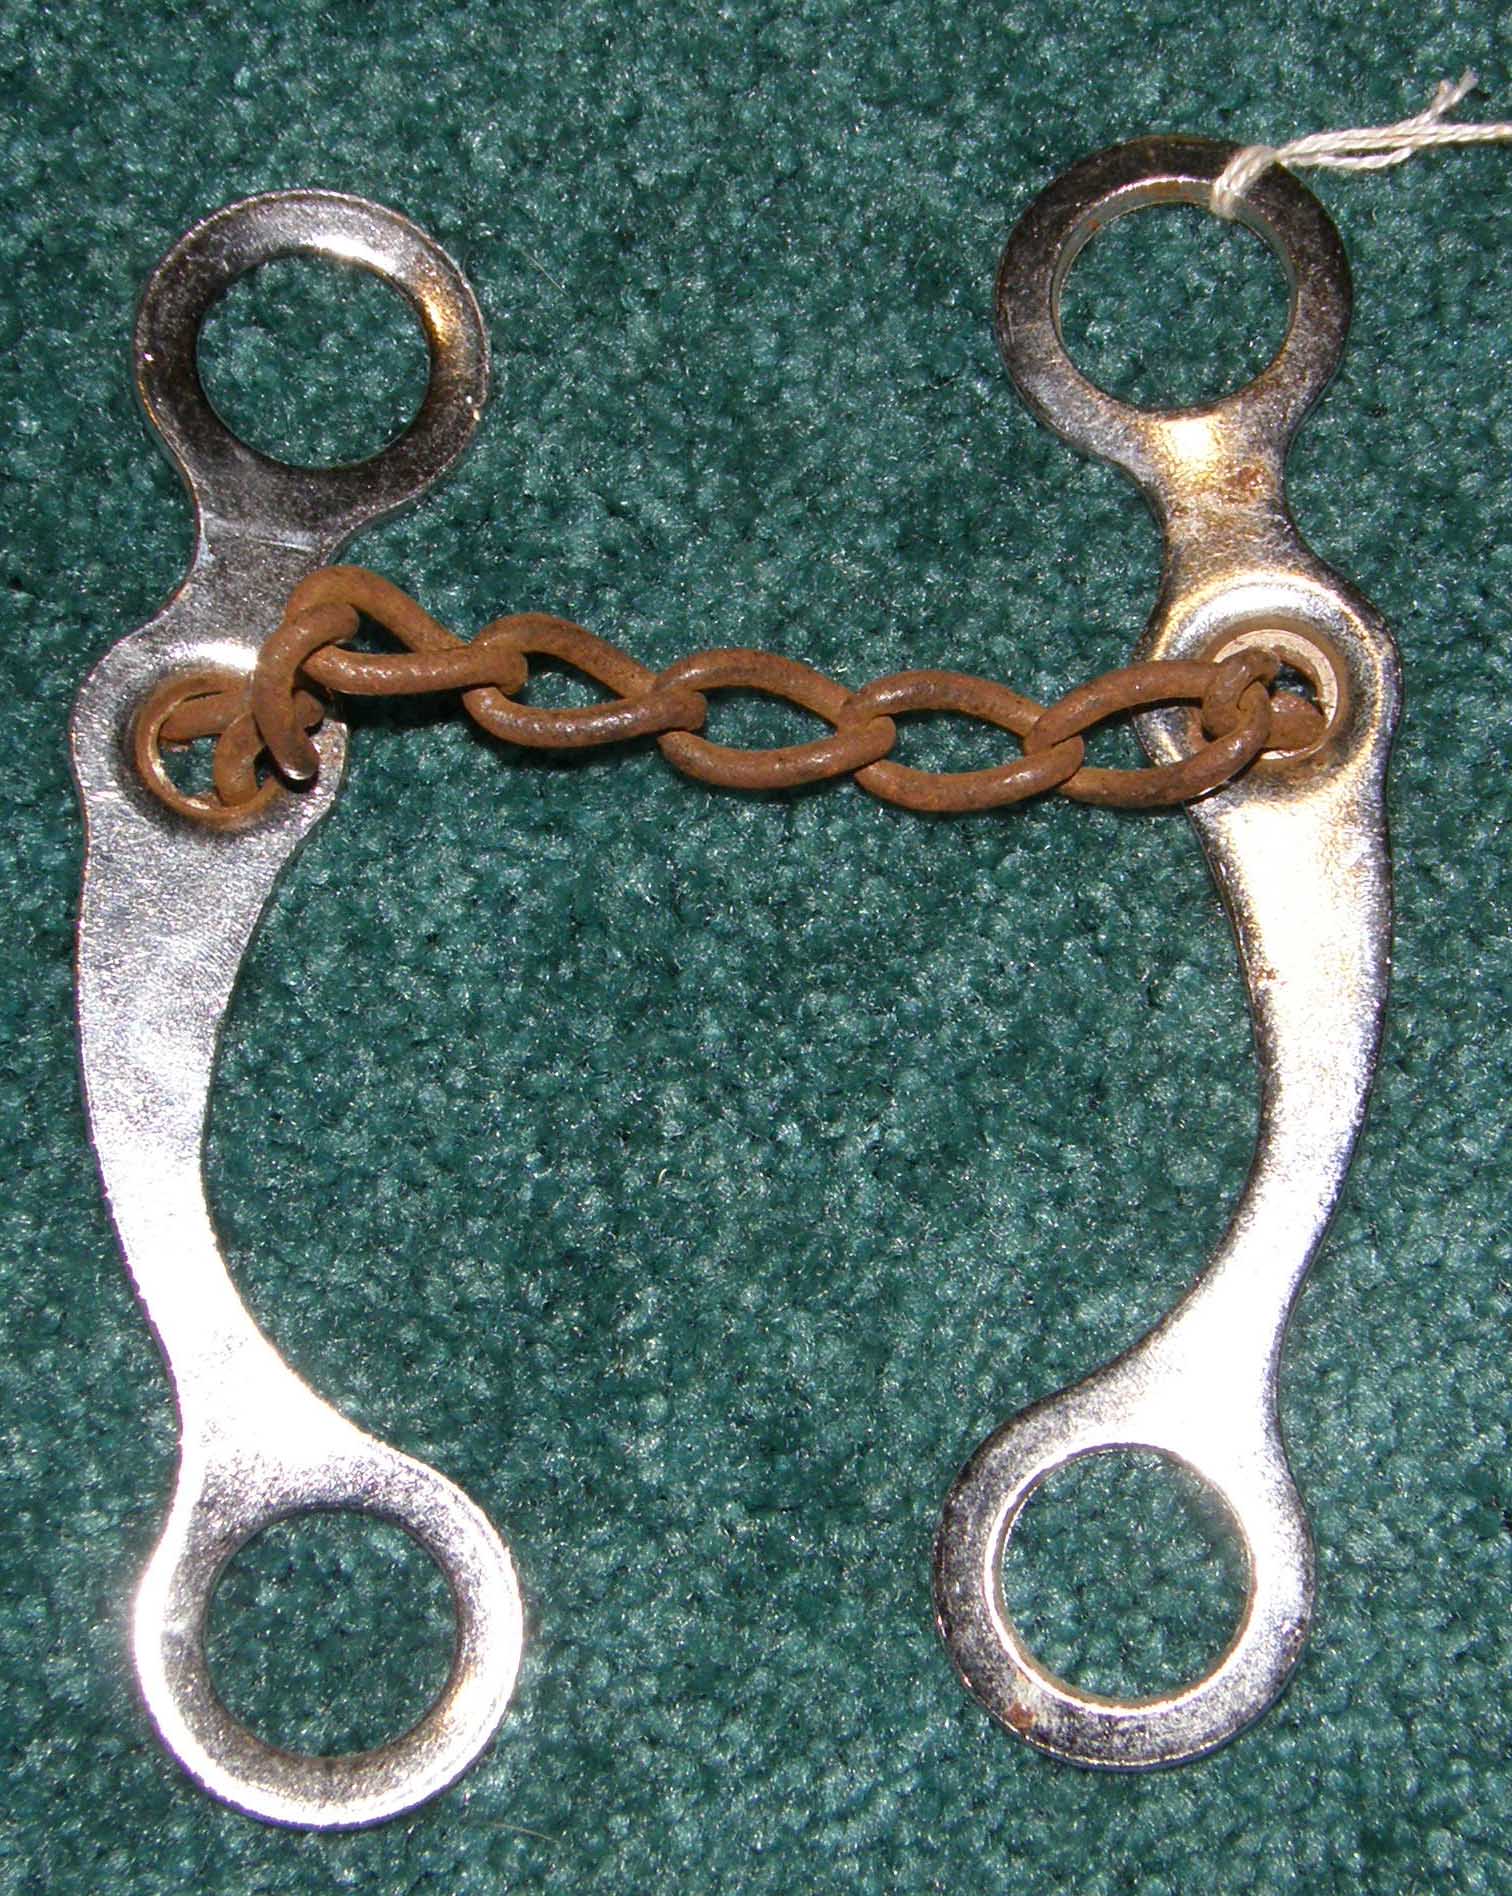 Chain Mouth Curb Bit Sweet Iron Chain Roping Bit Western Curb Bit or Make Your Own Curb Bit Replacement Bit Shanks